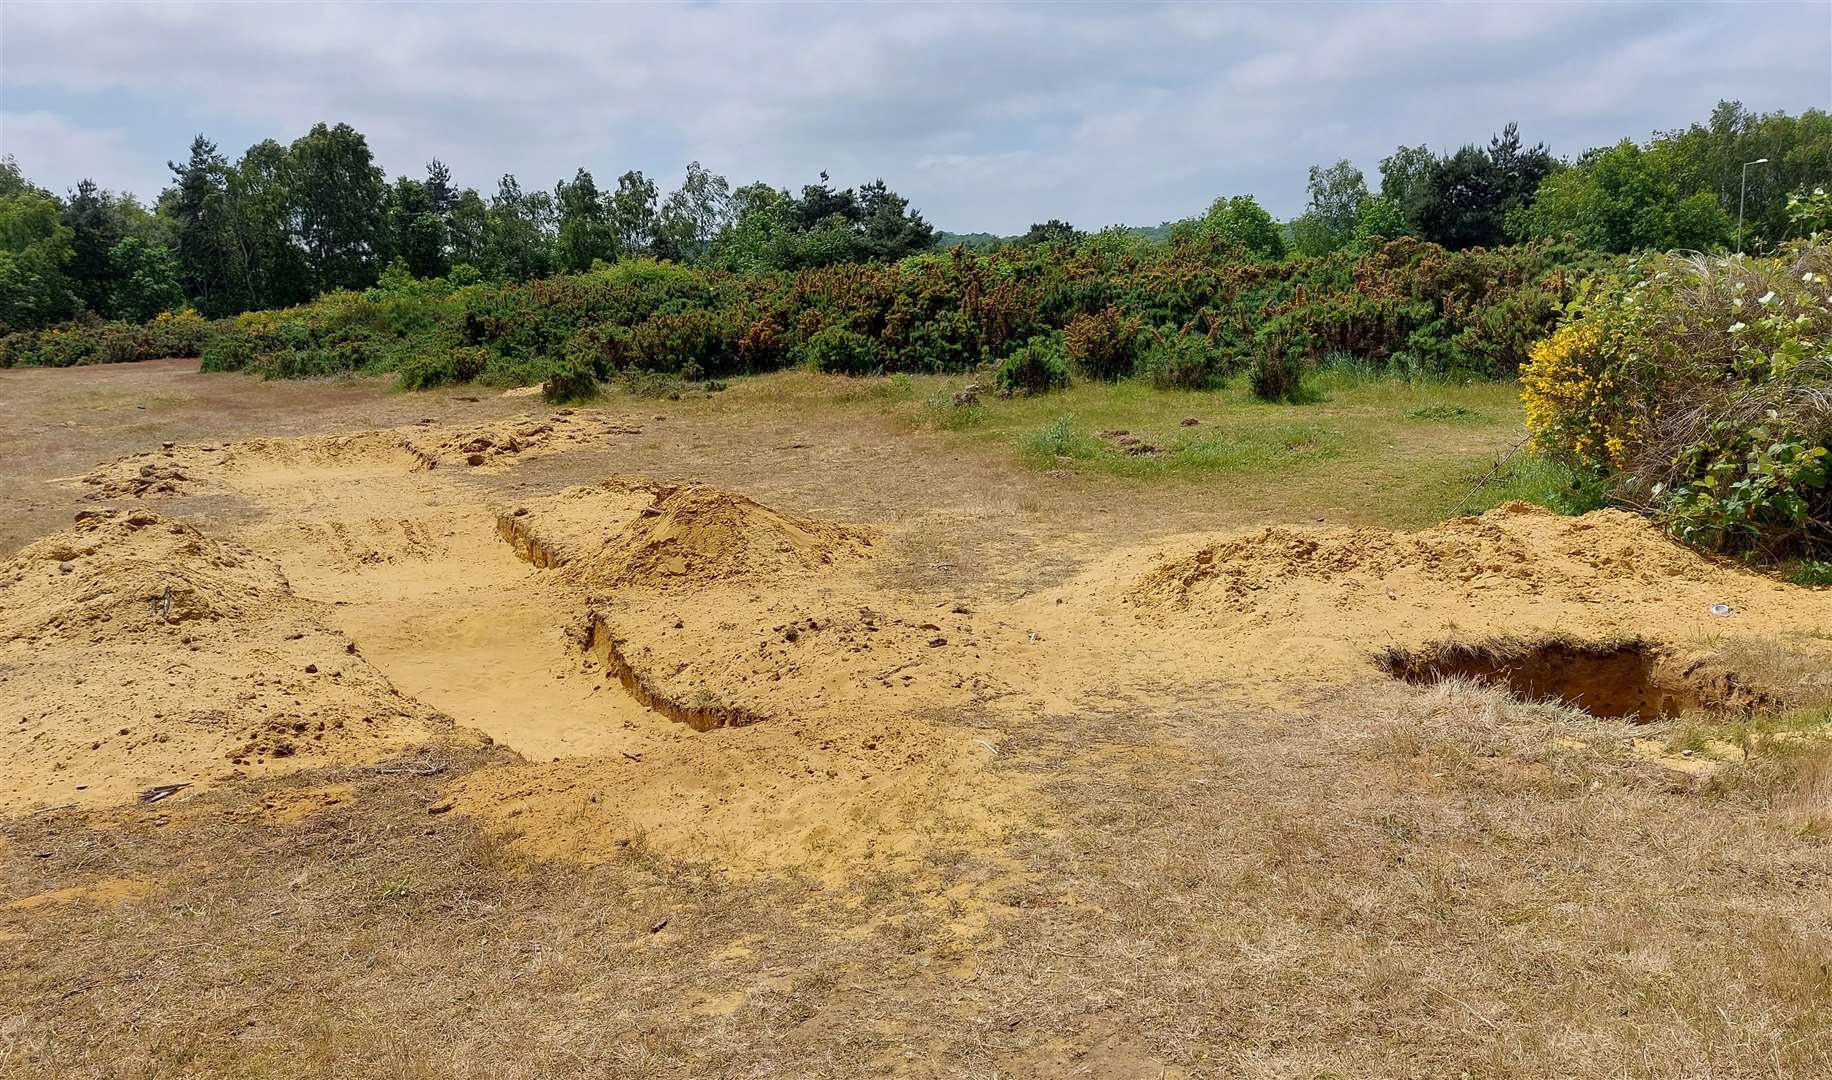 Several dirt jumps have been created off Trinity Road